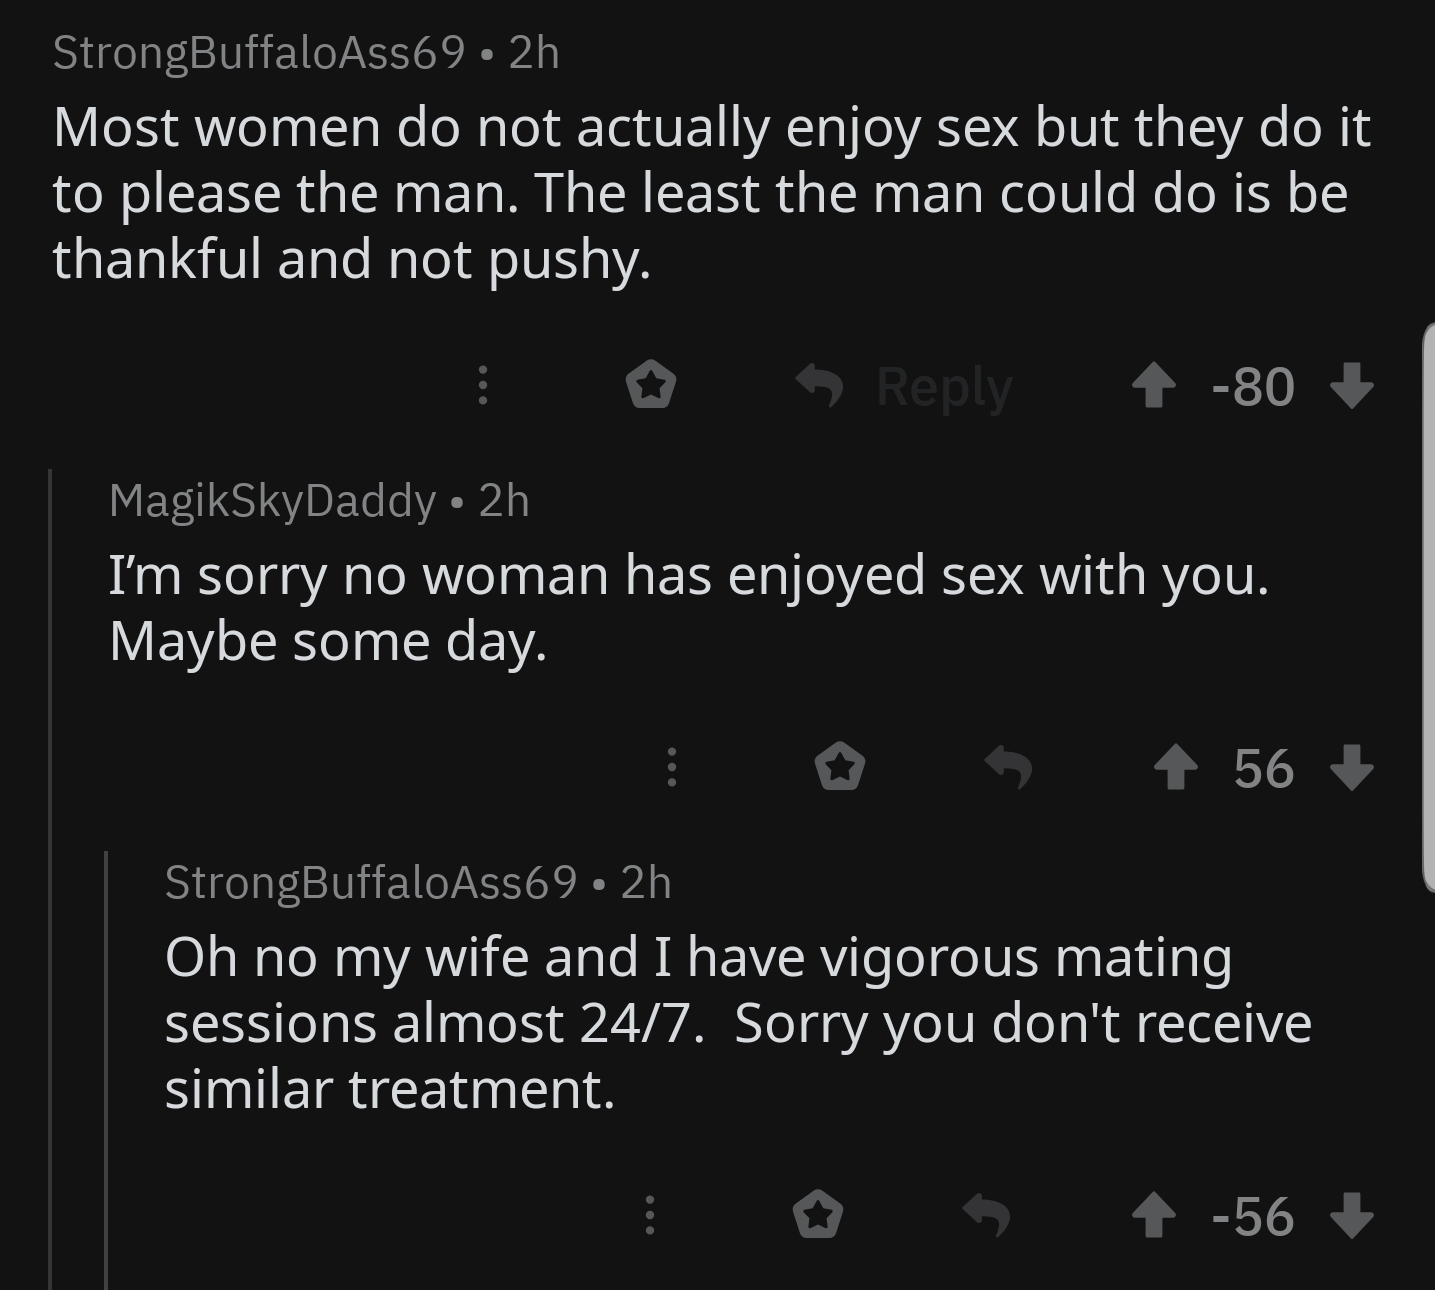 screenshot - StrongBuffaloAss69 2h Most women do not actually enjoy sex but they do it to please the man. The least the man could do is be thankful and not pushy. 0 80 MagikSkyDaddy 2h I'm sorry no woman has enjoyed sex with you. Maybe some day. i 5 4 56…